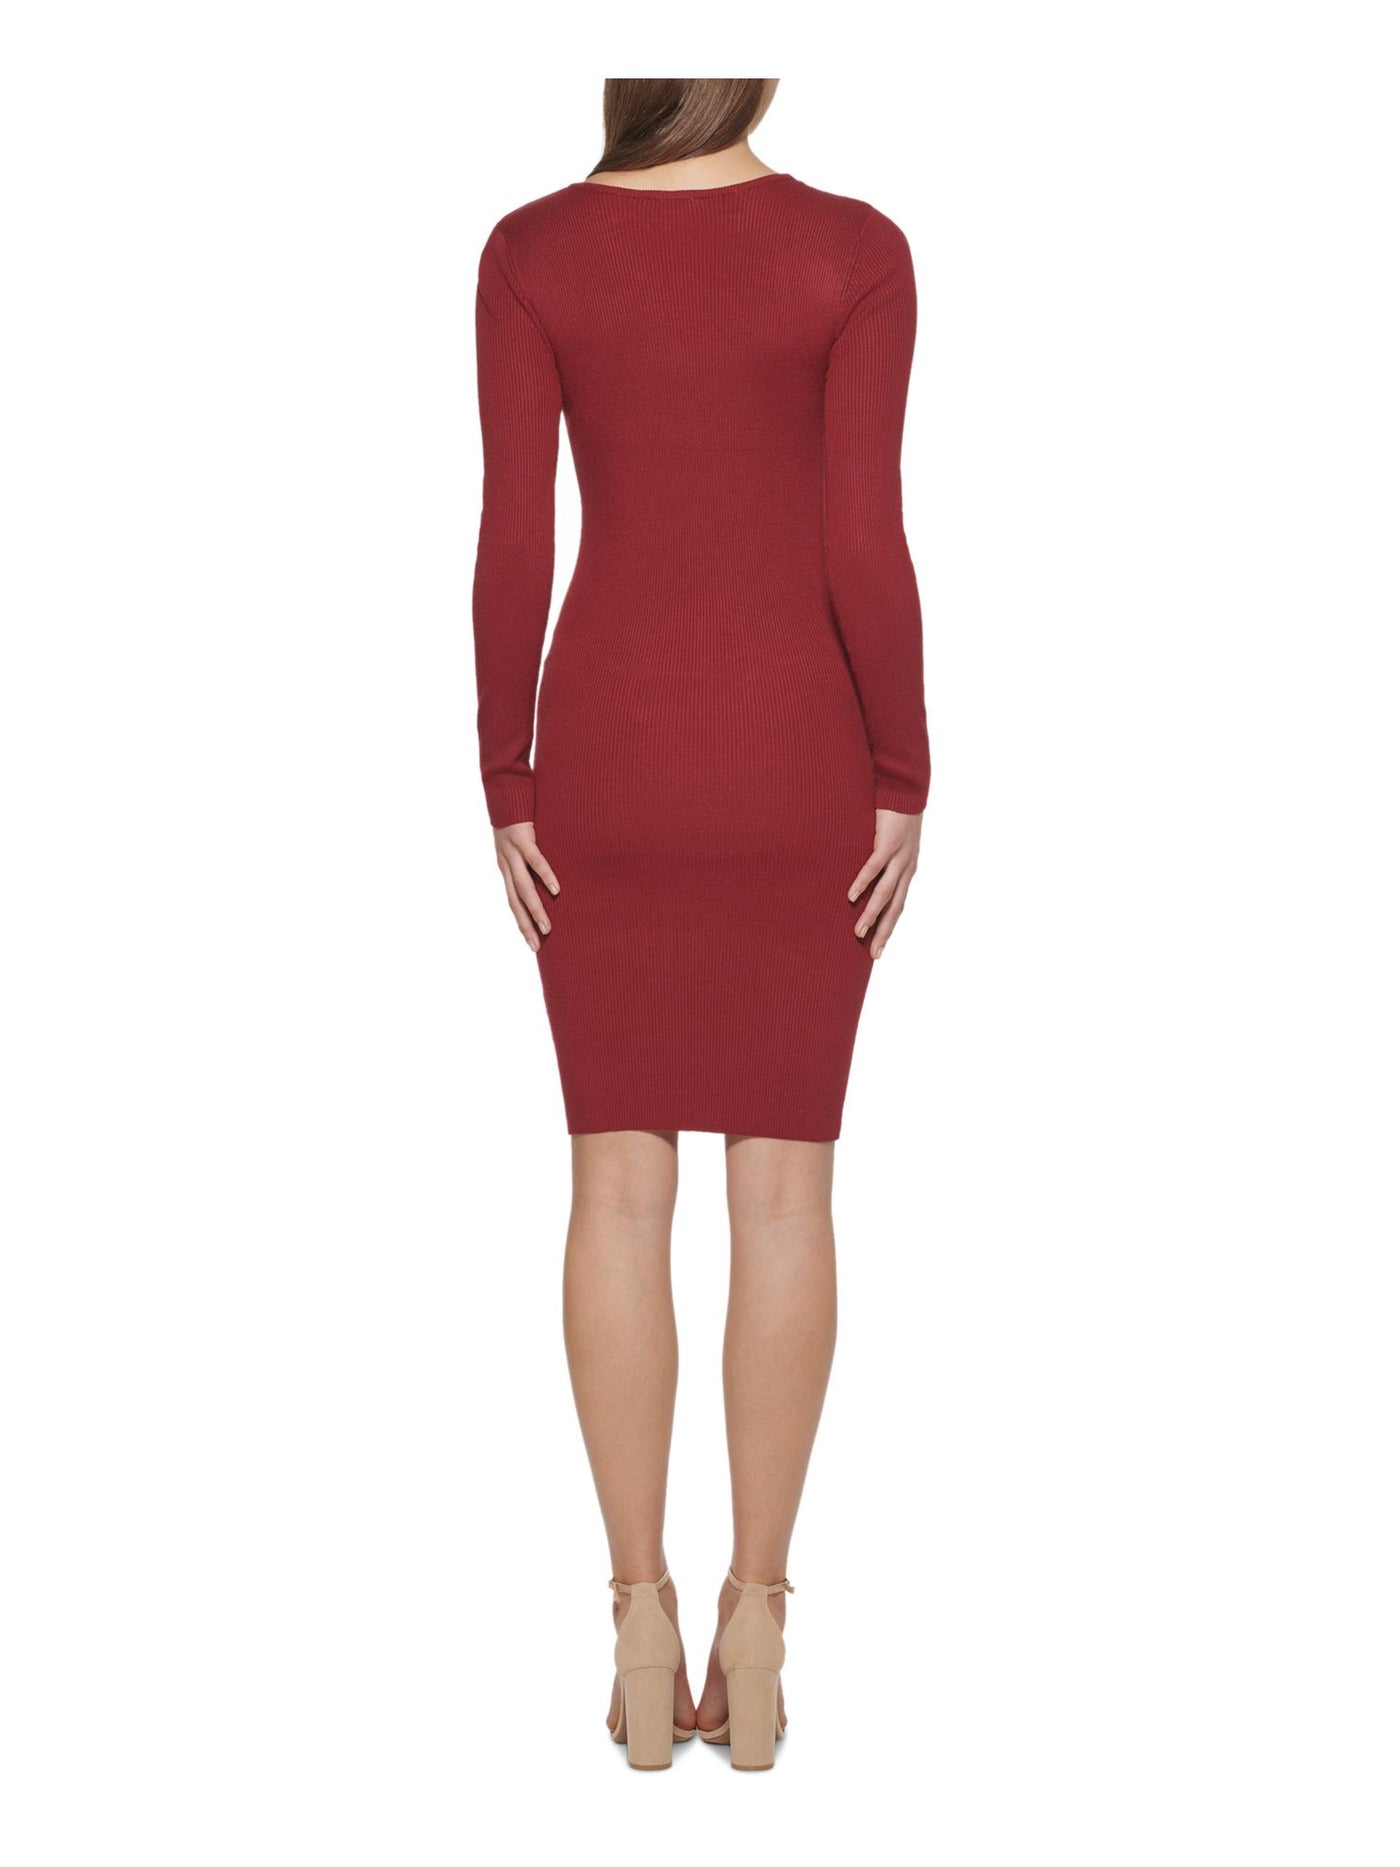 GUESS Womens Burgundy Knit Ribbed Fitted Body Con Long Sleeve Square Neck Below The Knee Cocktail Sweater Dress XL